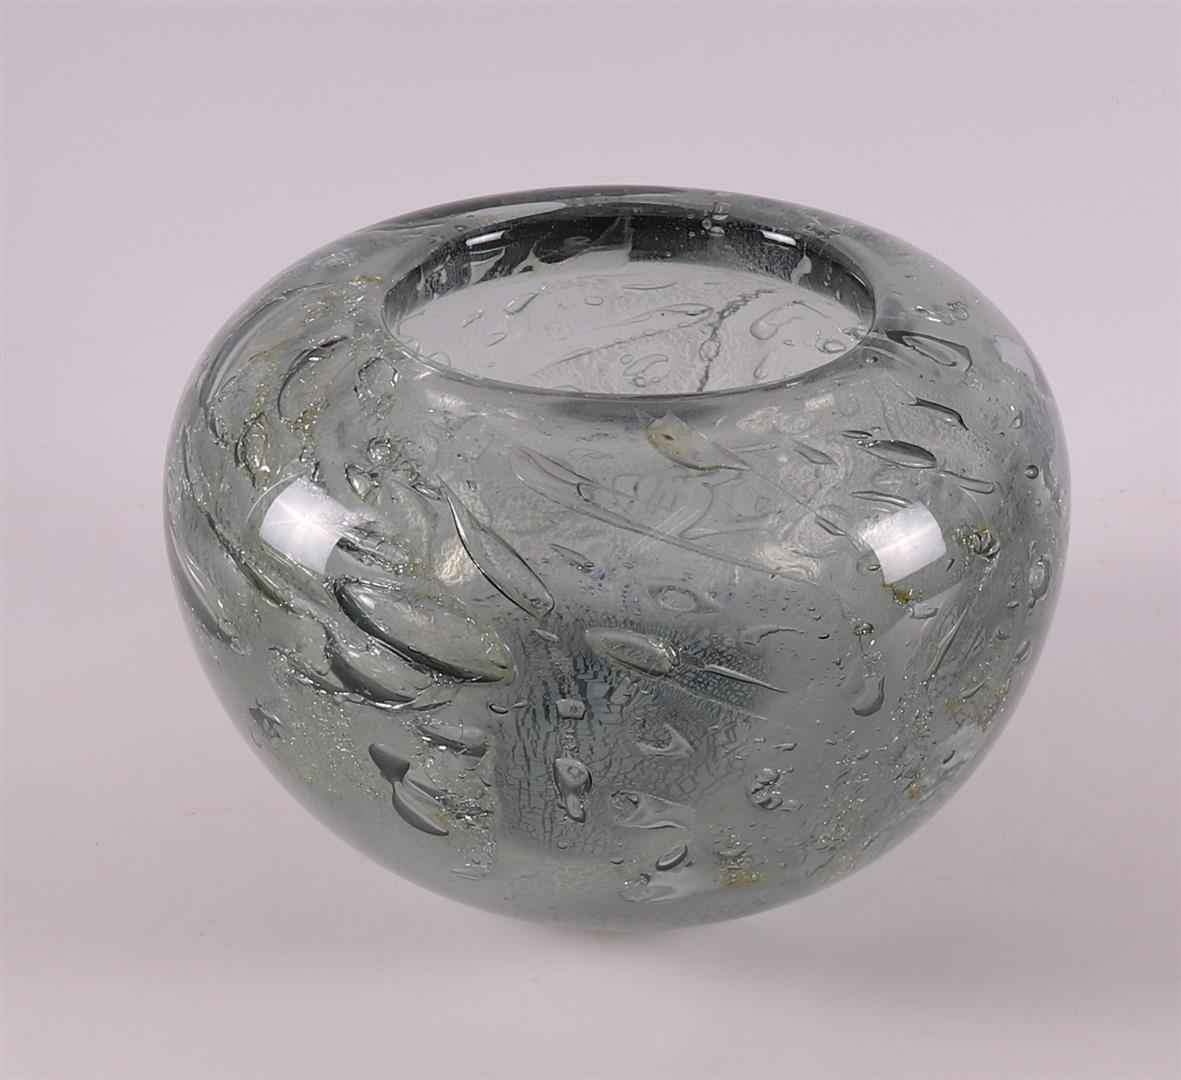 A thick-walled clear glass unica vase with enclosed air bubbles, A.D. Copier.